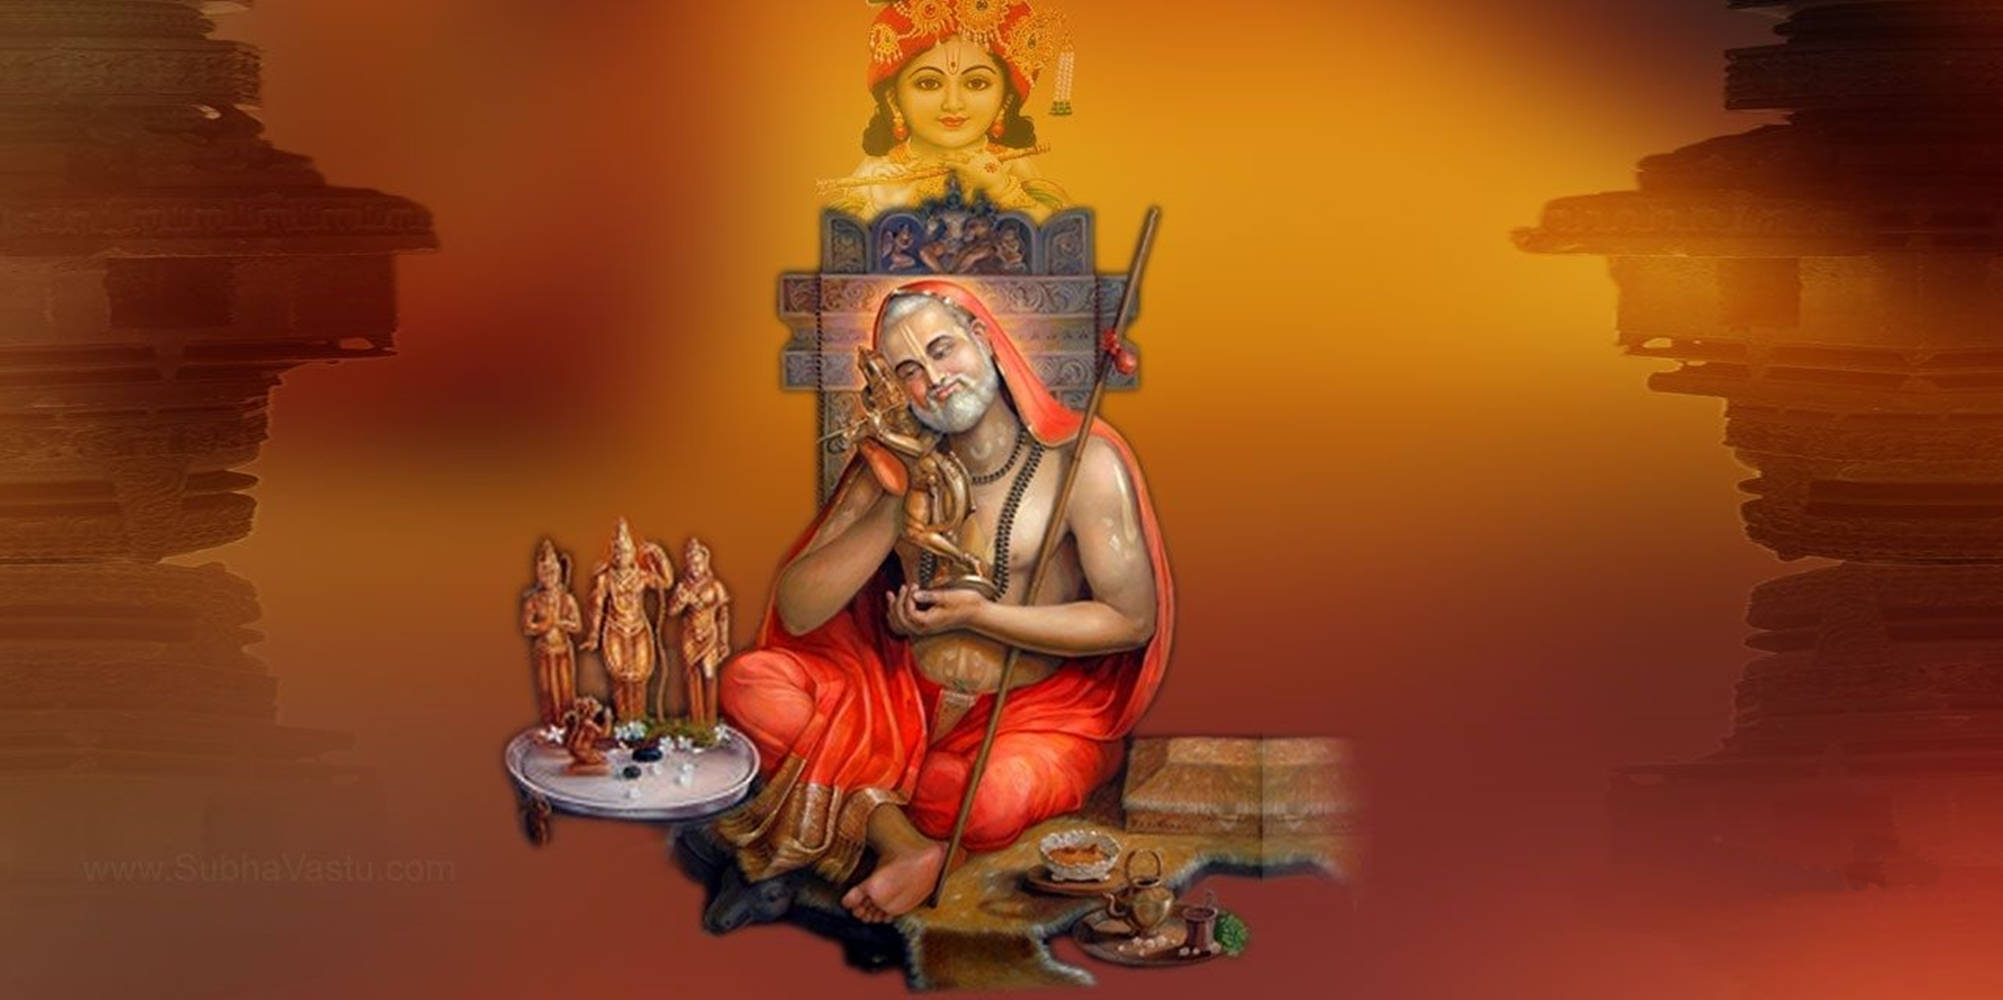 Serene Divine Scene - Lord Raghavendra Surrounded by Sacred Indian Statues. Wallpaper